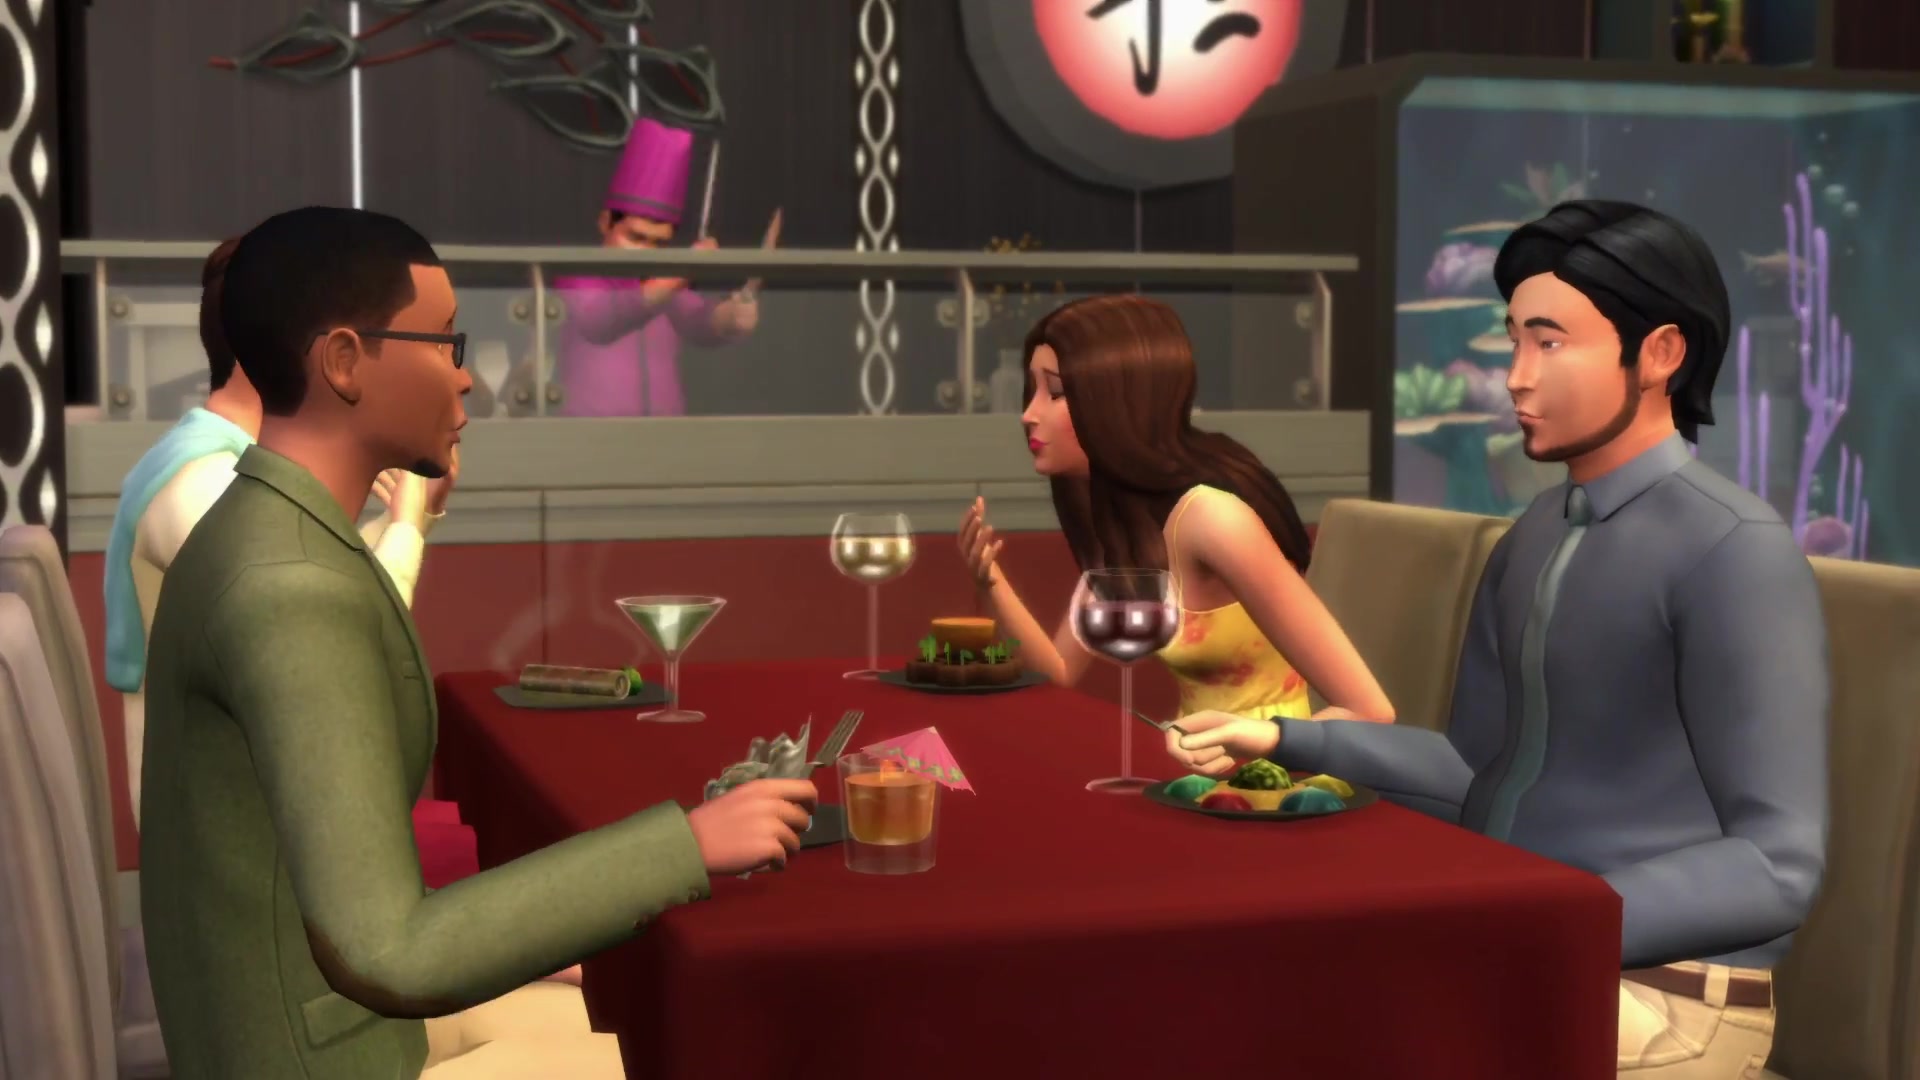 The Sims 4 Dine Out Promo Video | SimsVIP